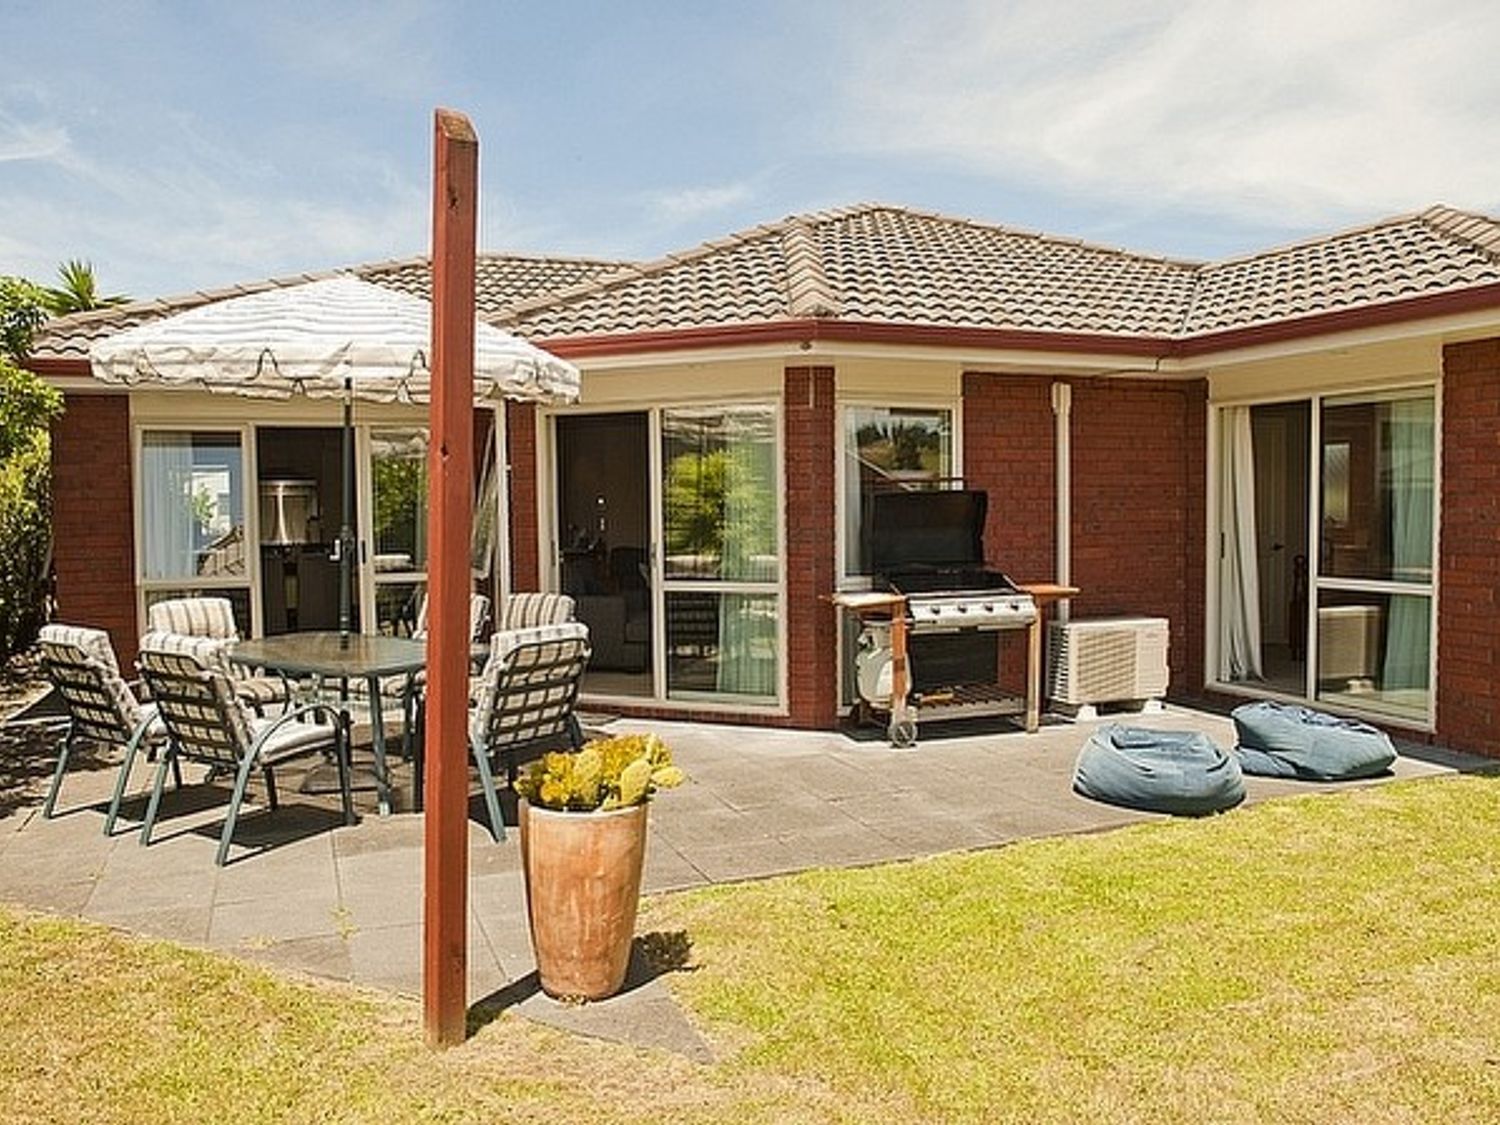 Bliss by the Beach - Whangamata Holiday Home -  - 1032134 - photo 1